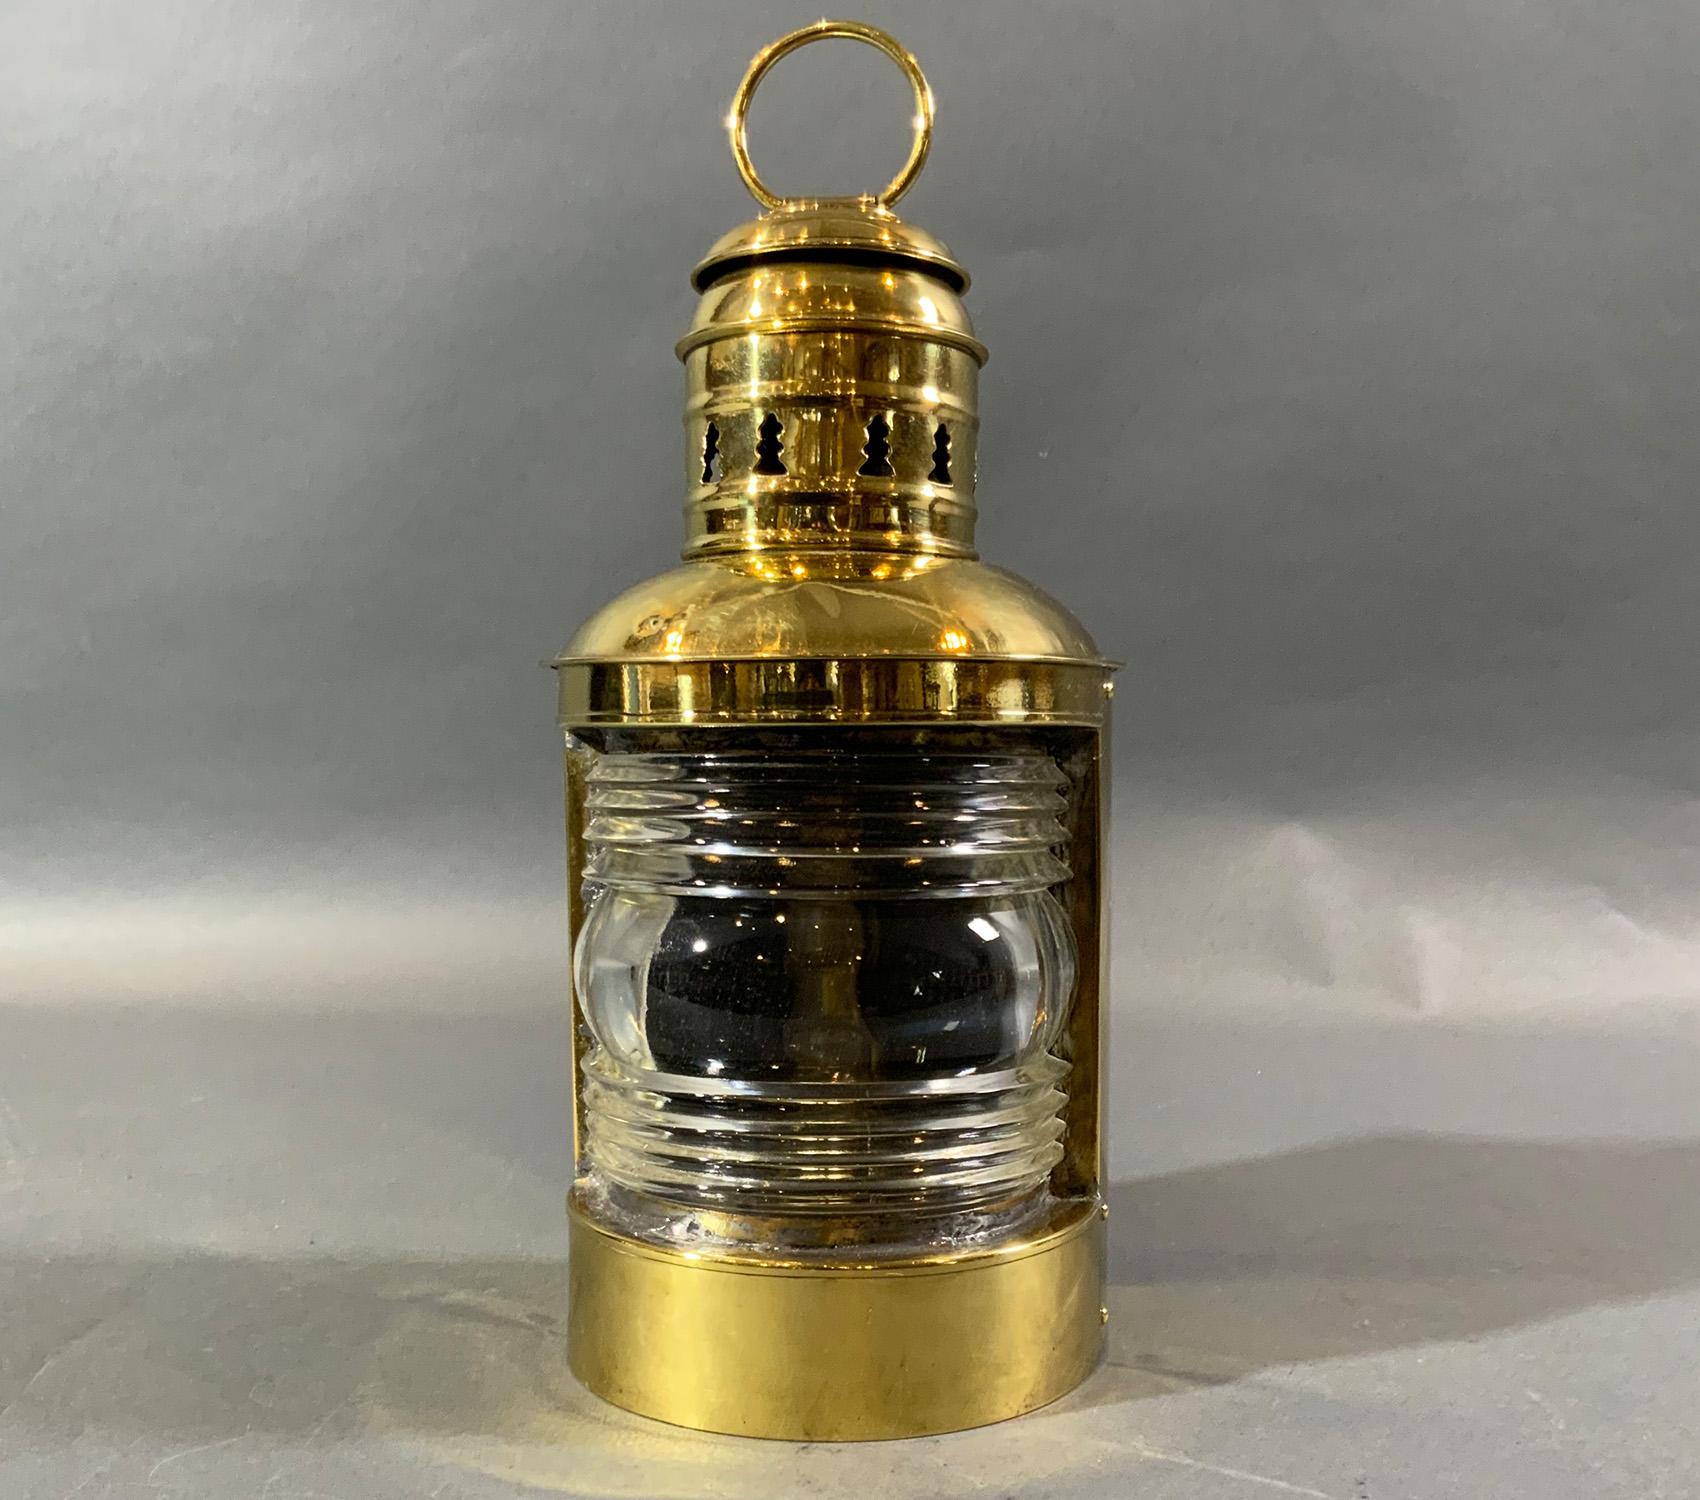 Solid brass ships masthead lantern with Fresnel glass lens. Fitted with its original burner. Mounting flange on rear. Lantern is by Perkins Marine Lamp Corporation of Brooklyn New York. Vented top and carry ring.

Weight: 3 LBS
Overall